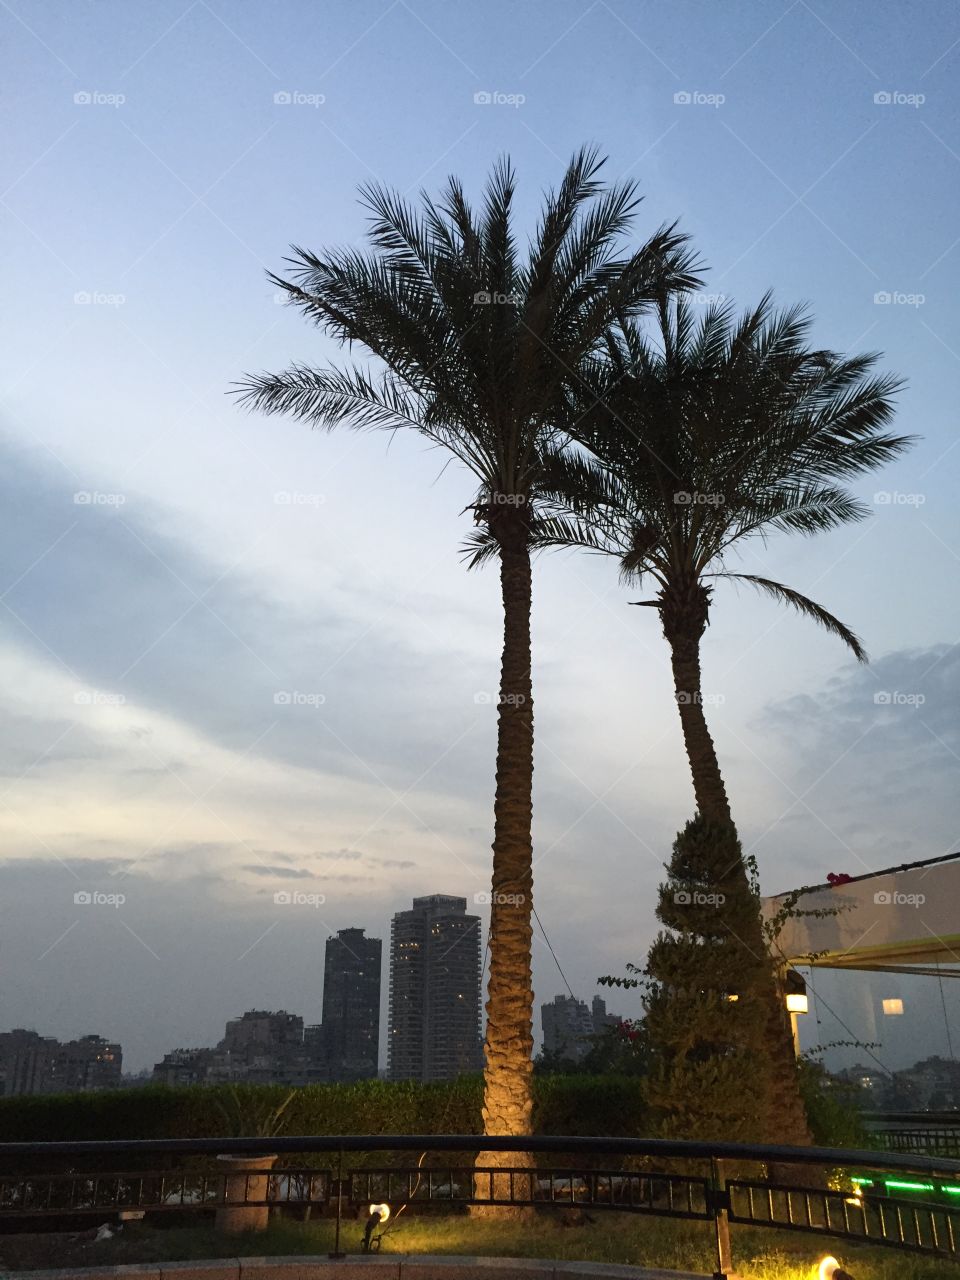 Palm trees in Cairo